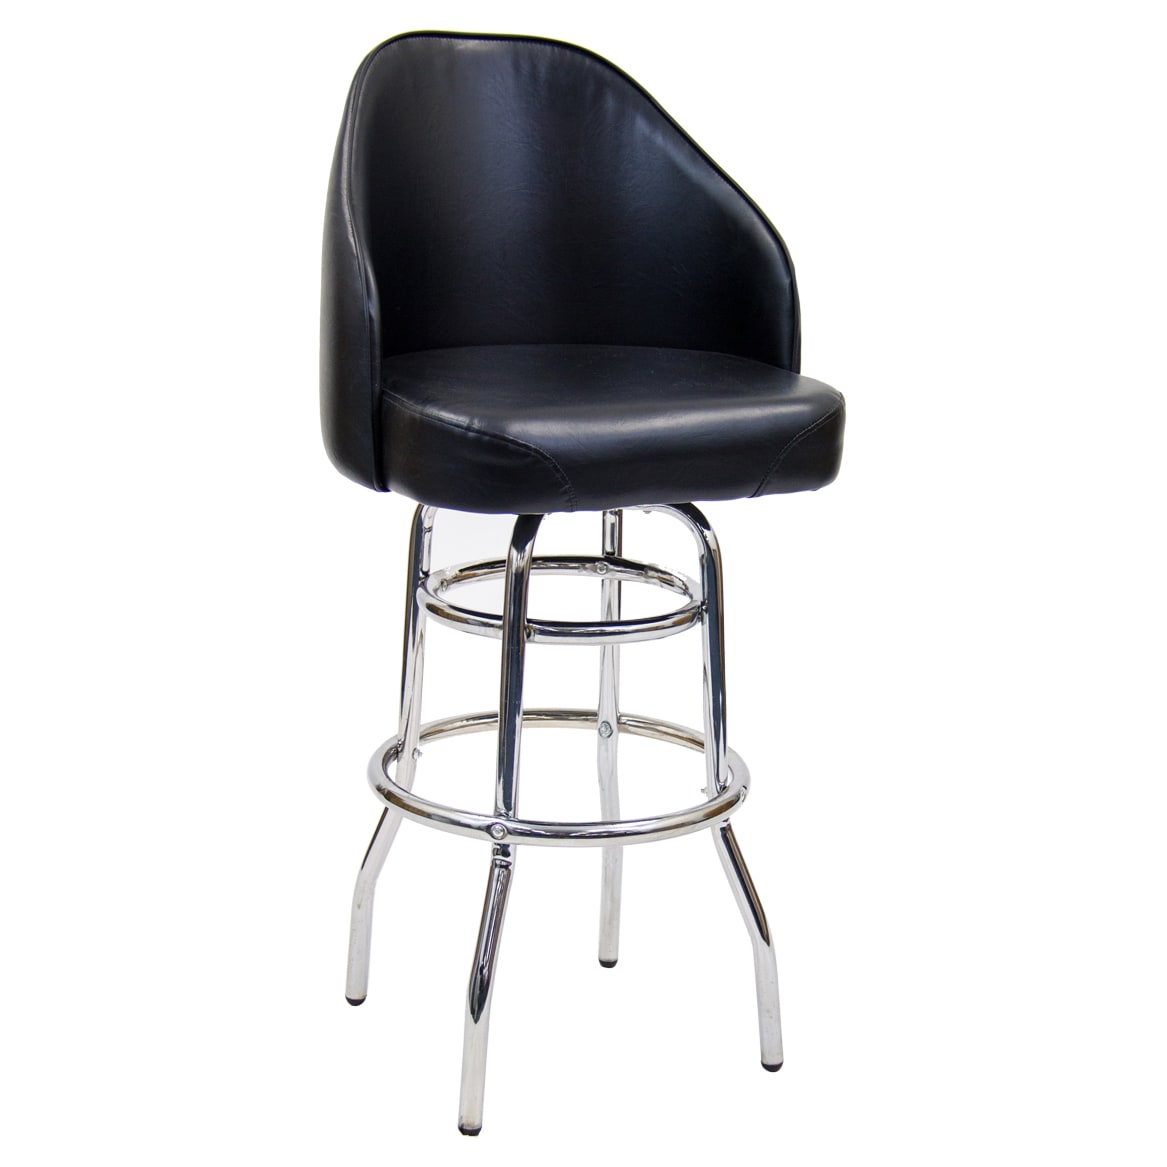 Commercial Quality Double Ring Chrome Bar Stool with Black Seat 